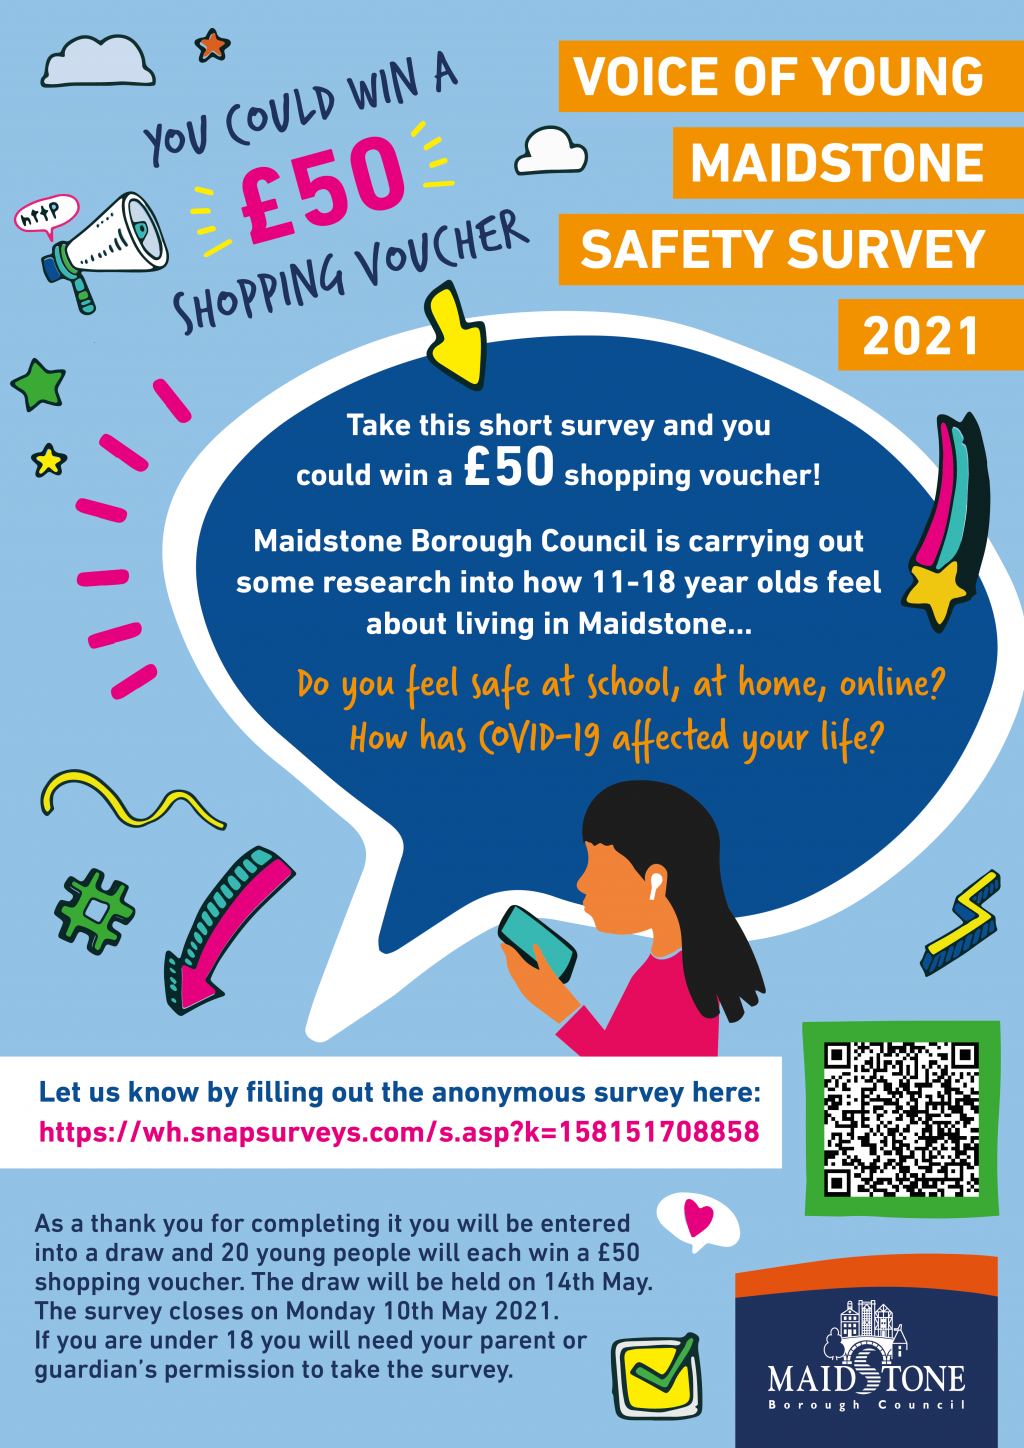 Voice of Young Maidstone Safety Survey 2021